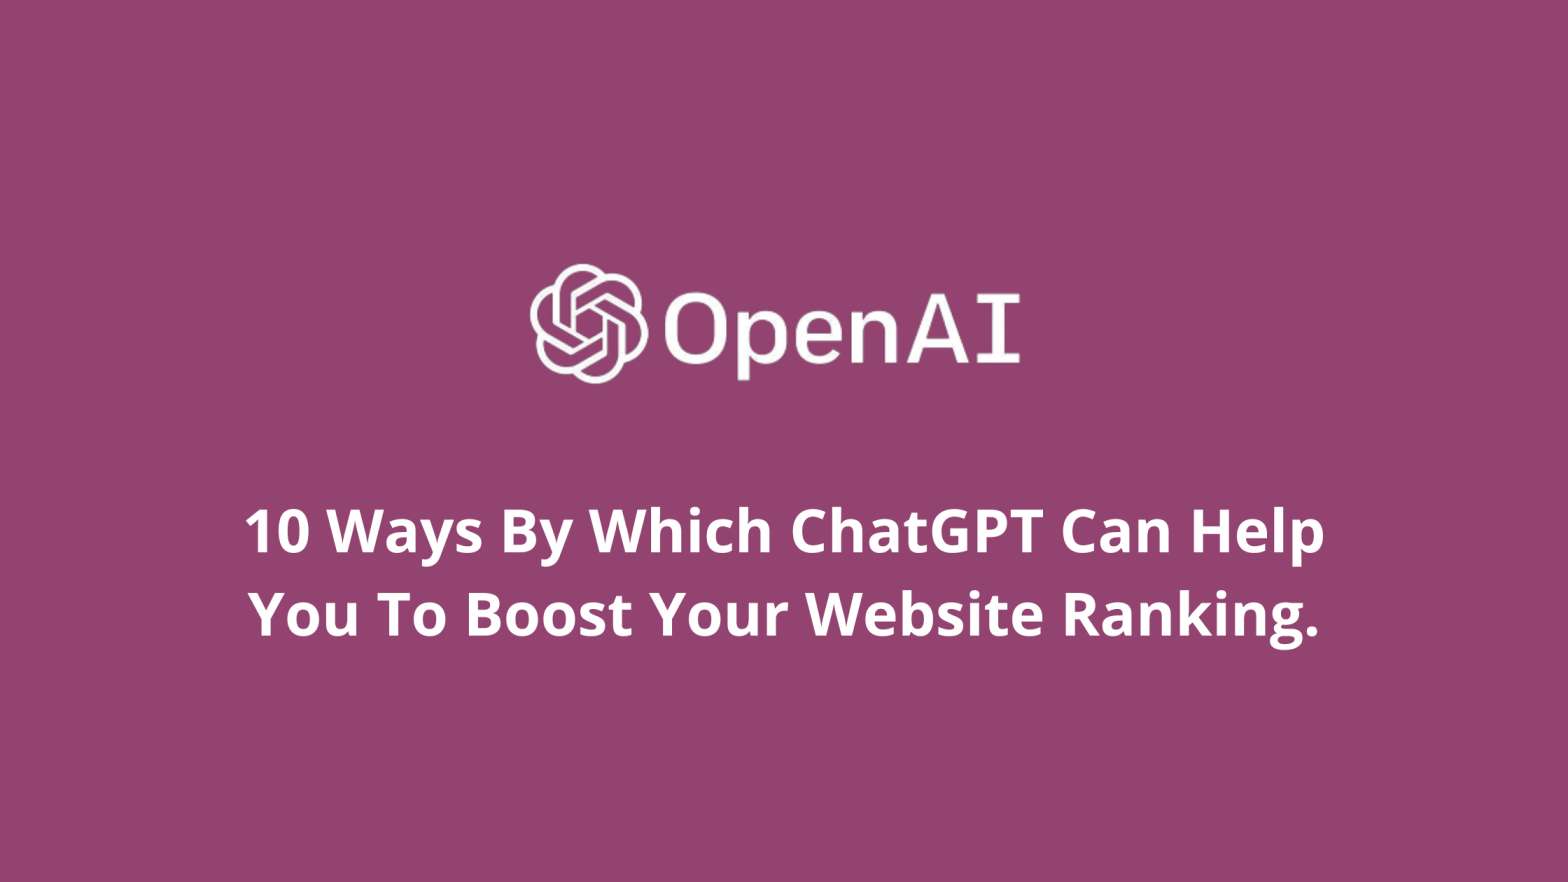 10 Ways By Which ChatGPT Can Help You To Boost Your Website Ranking in 2023